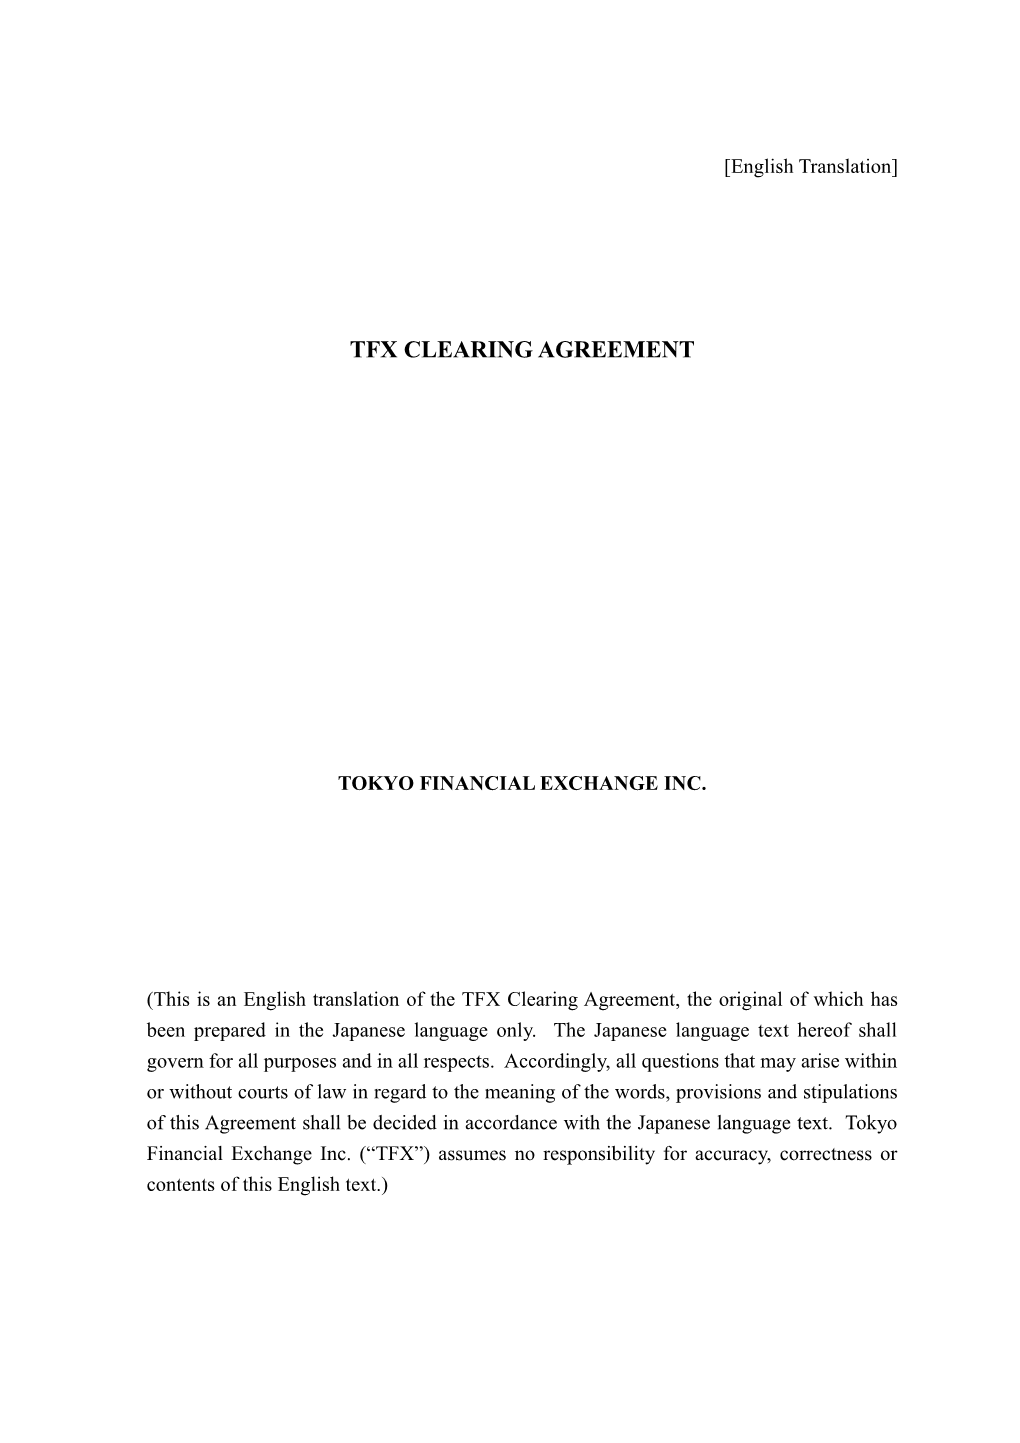 TFX Clearing Agreement 1